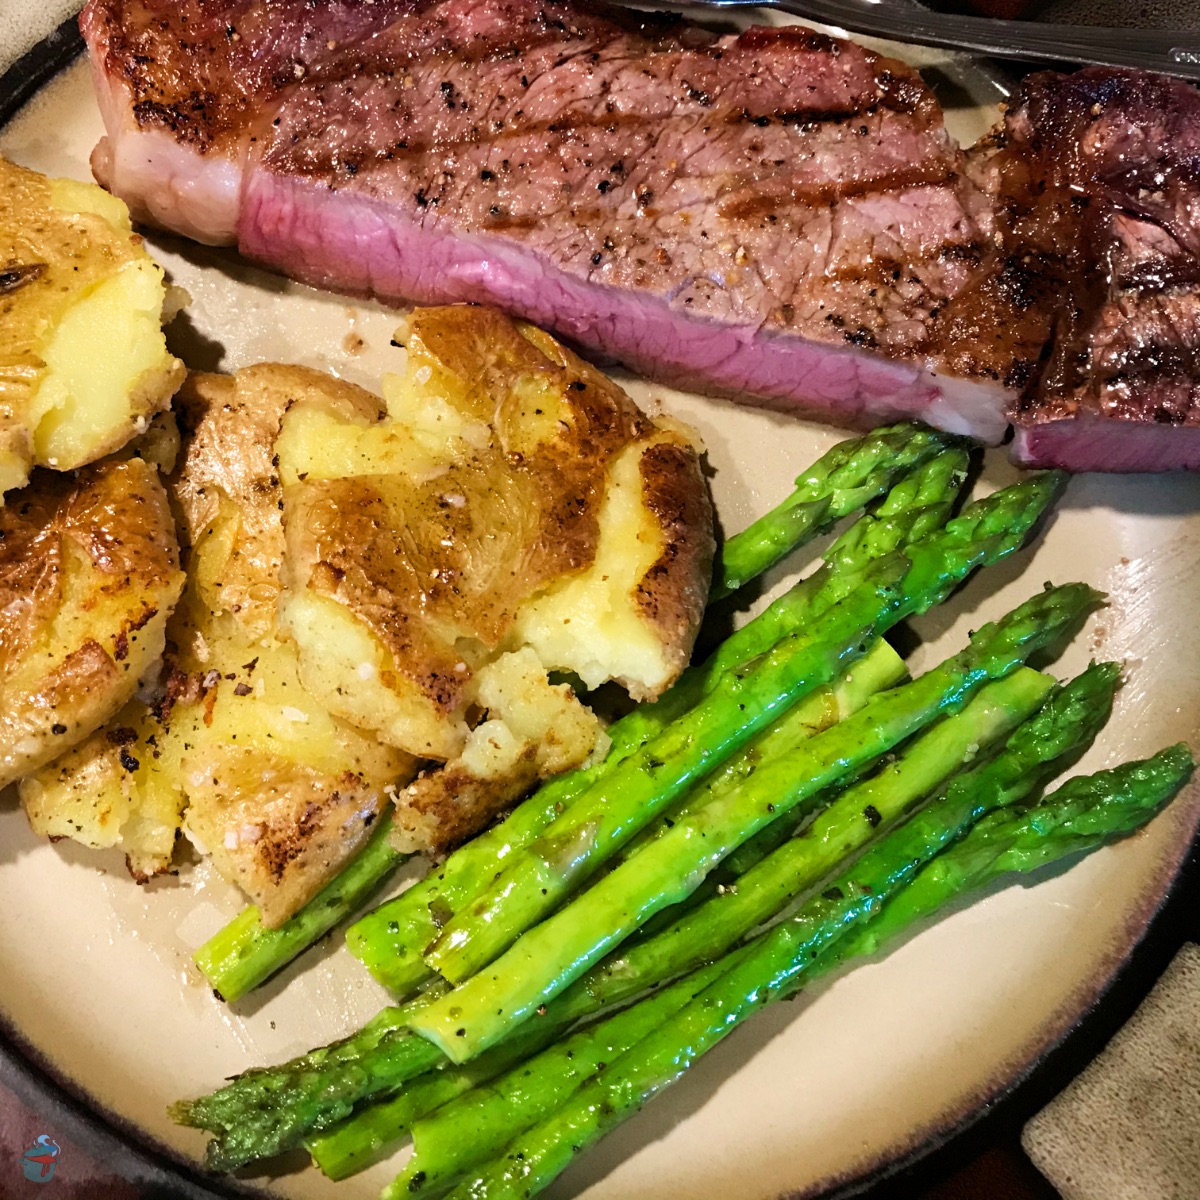 Microwave Asparagus served on a plate with a half of a New York Strip Steak and rosemary smashed potatoes.